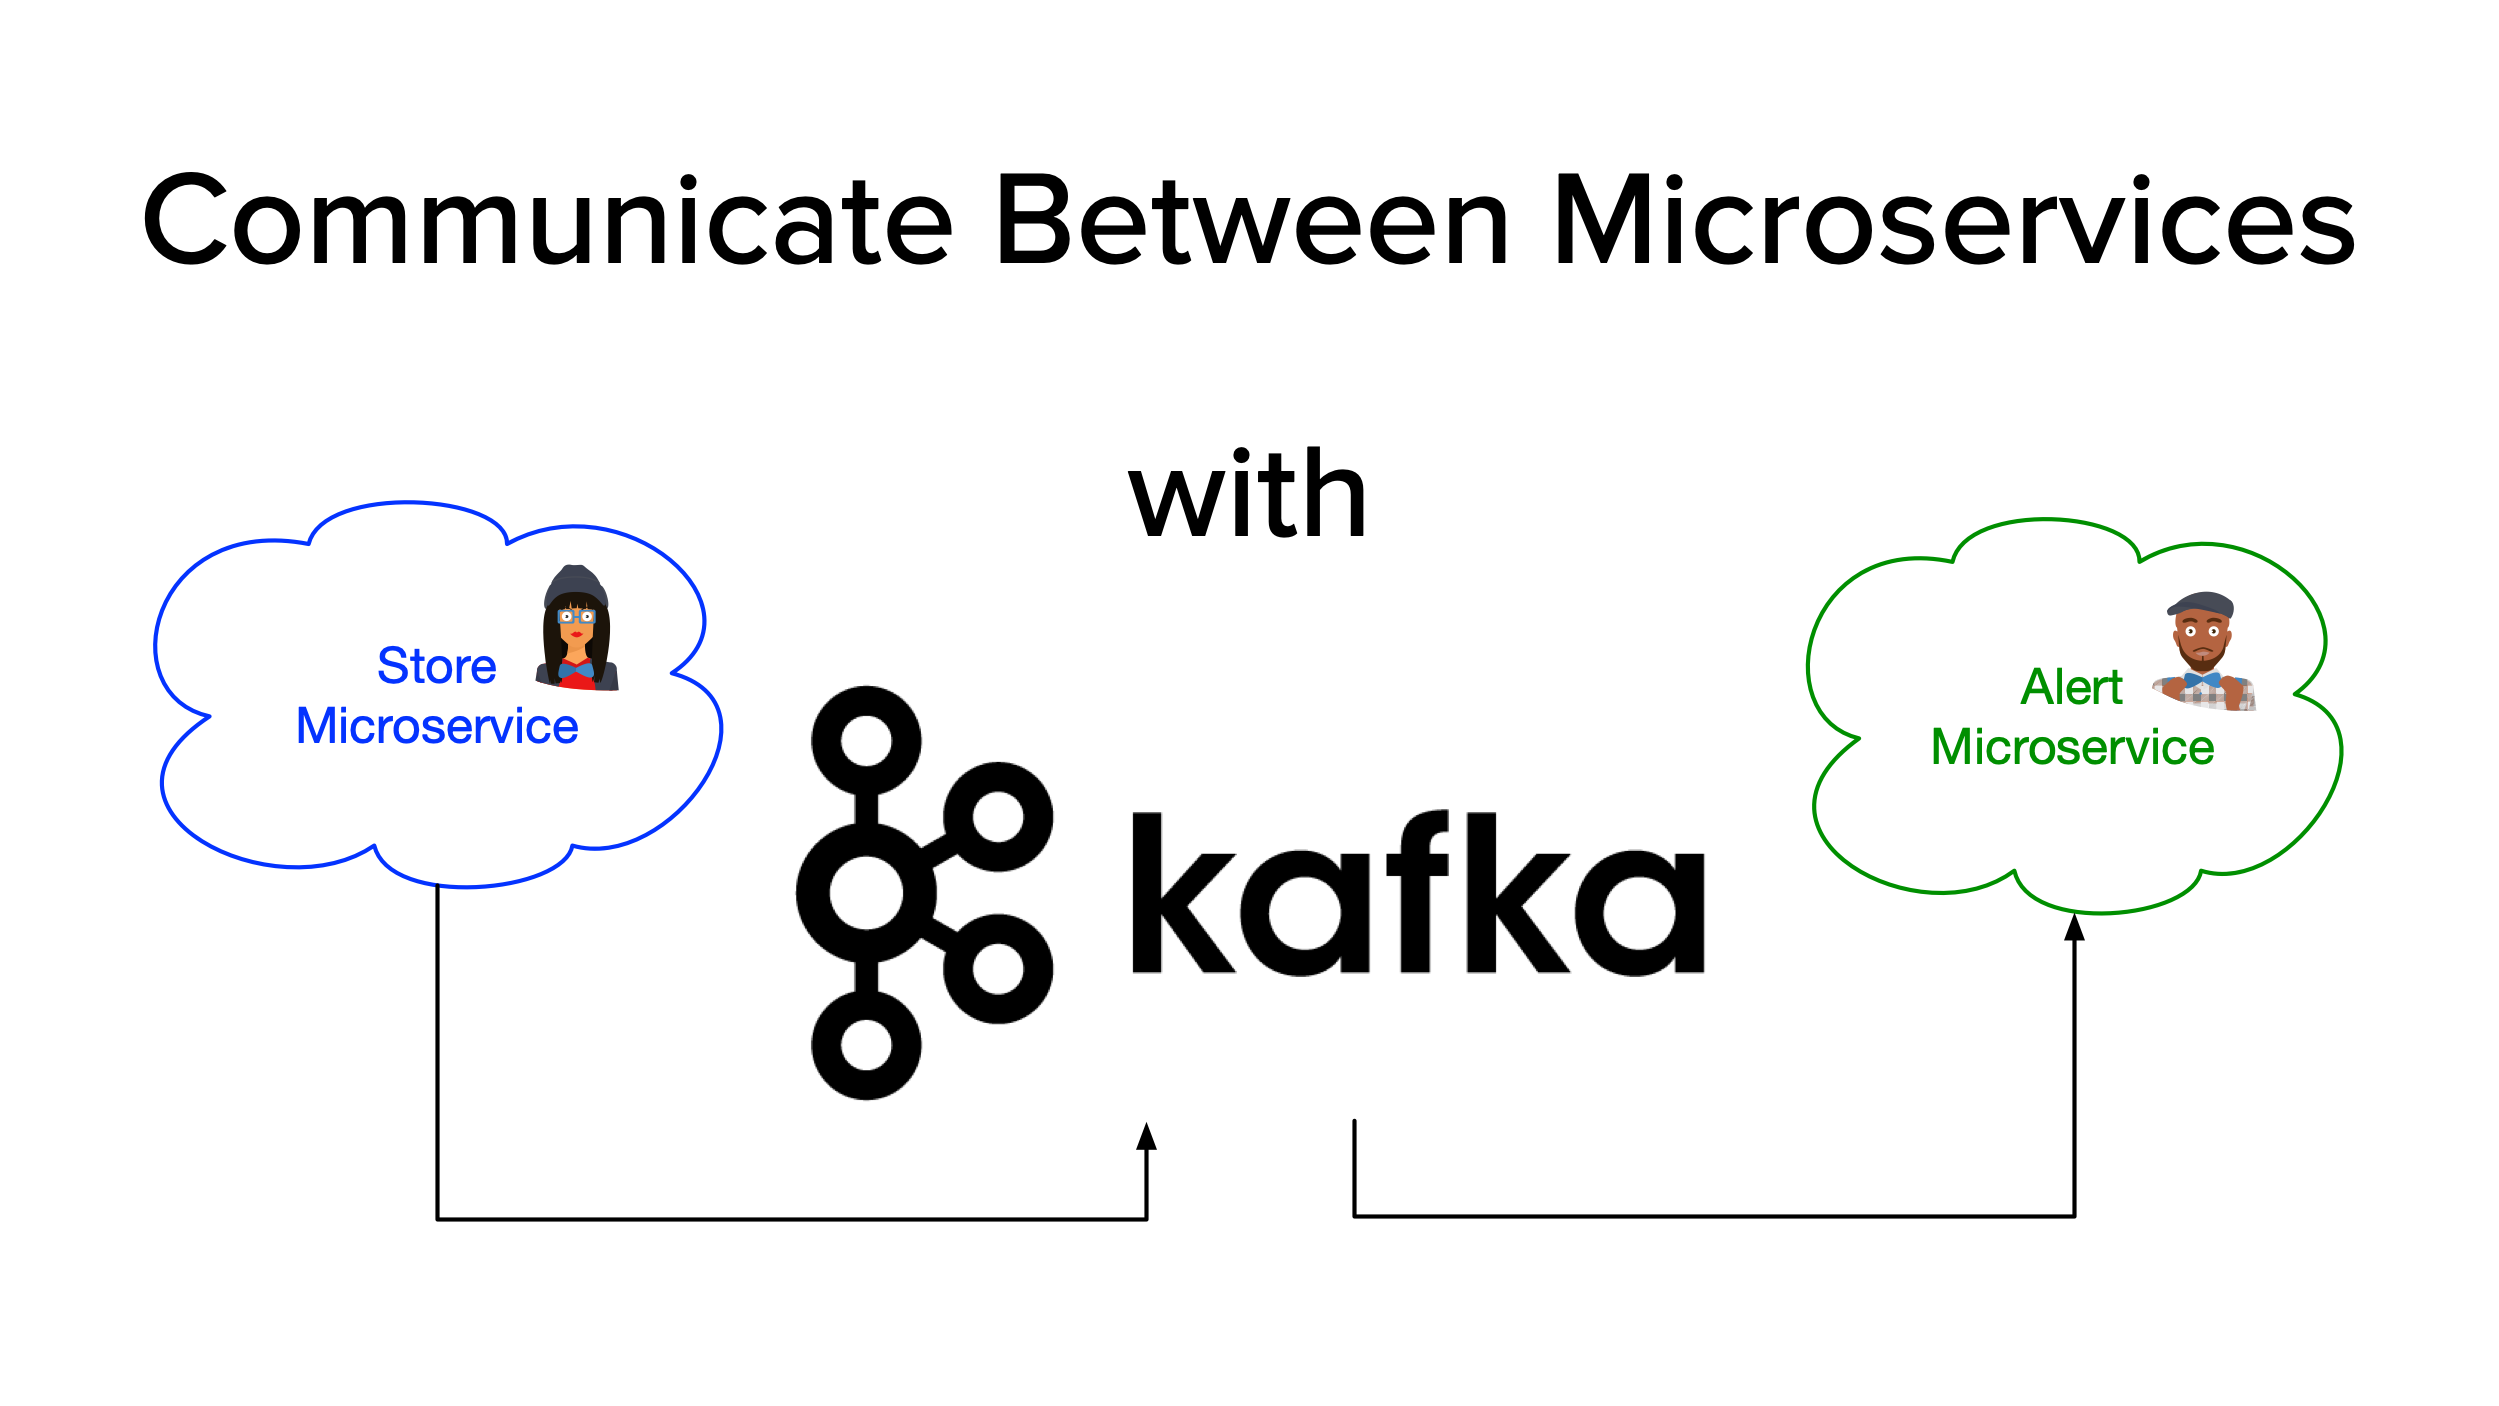 Communicate Between Microservices with Apache Kafka